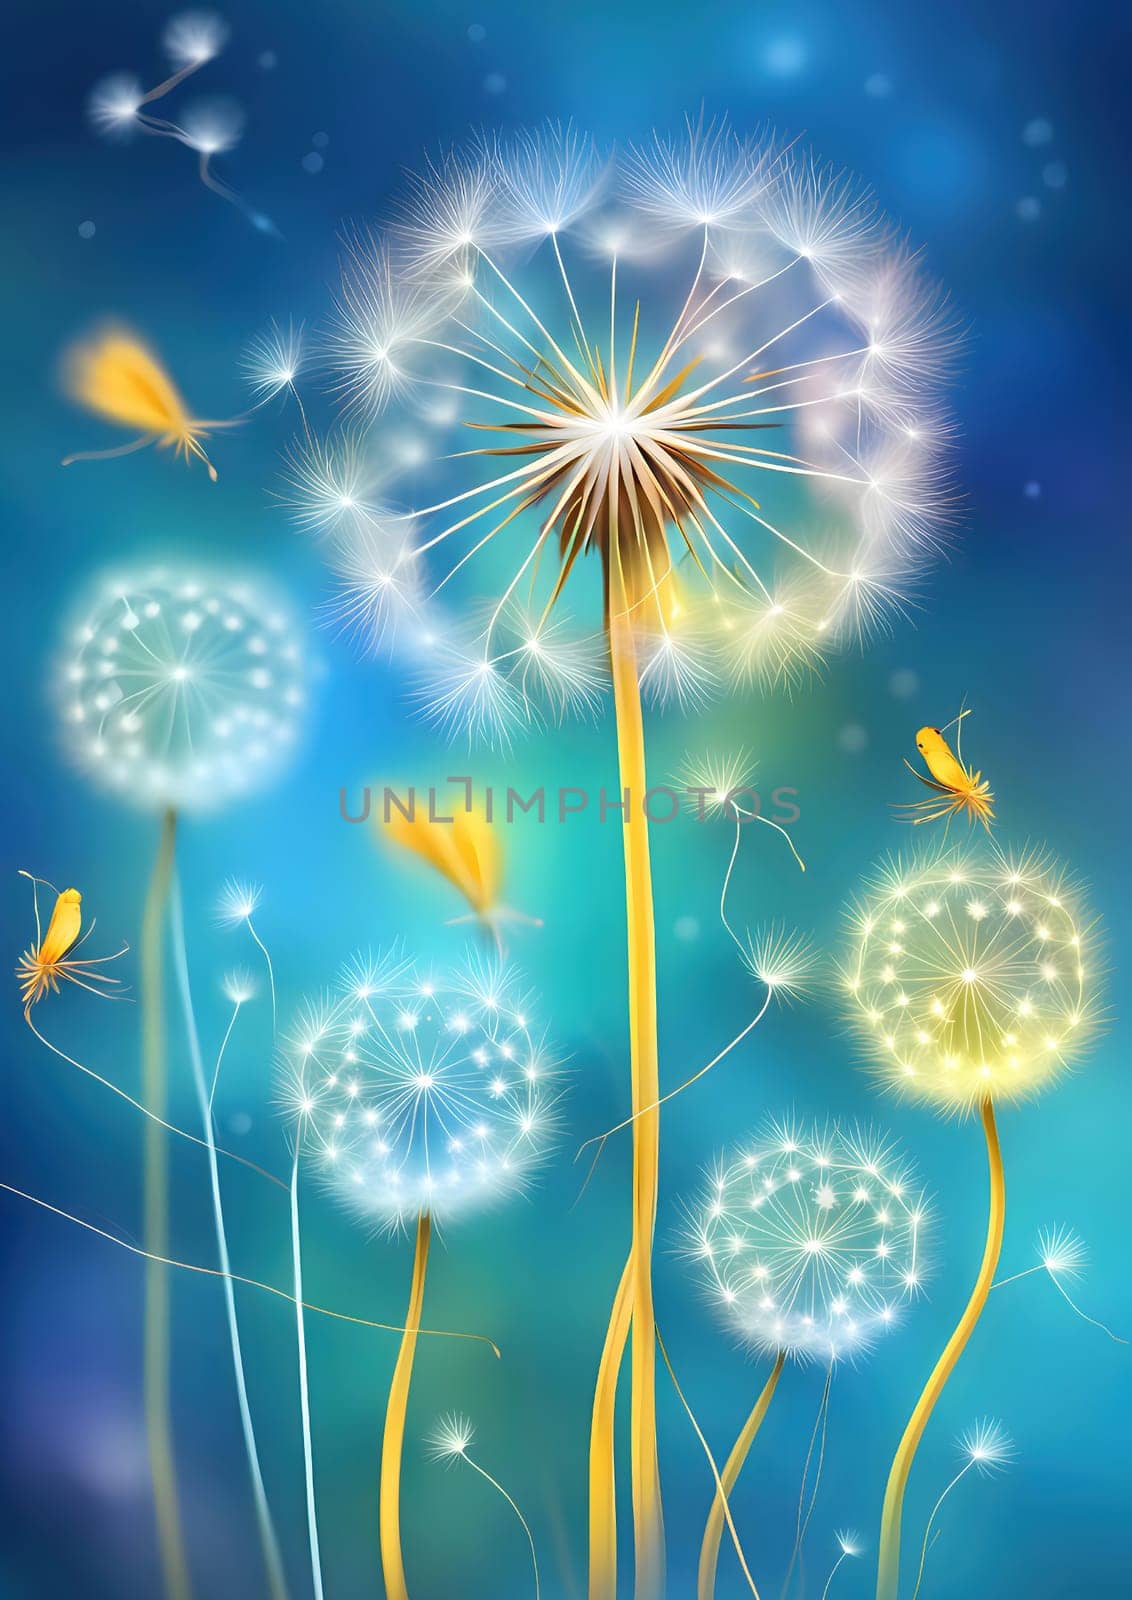 there are many different color dandelions on a blue background, blurred and dreamy illustration, fireflies and sparkling threads, connecting life, pastel colors, high detail illustration, by rostik924